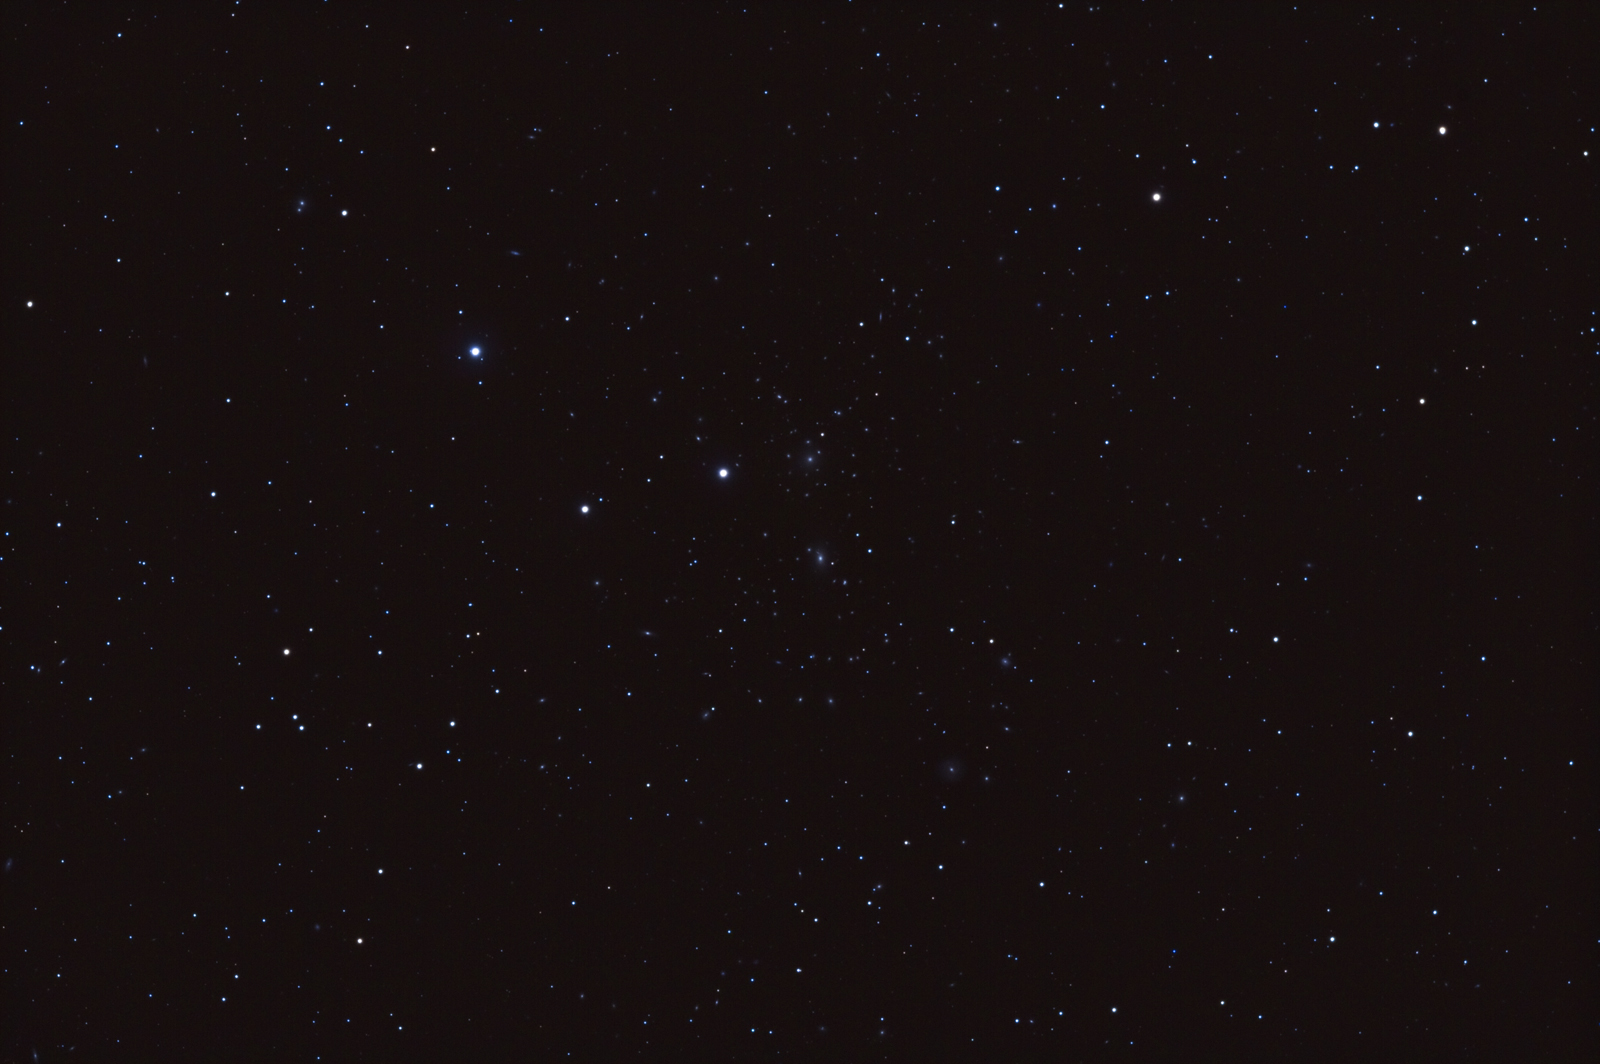 Coma Berenices Galaxa Cluster